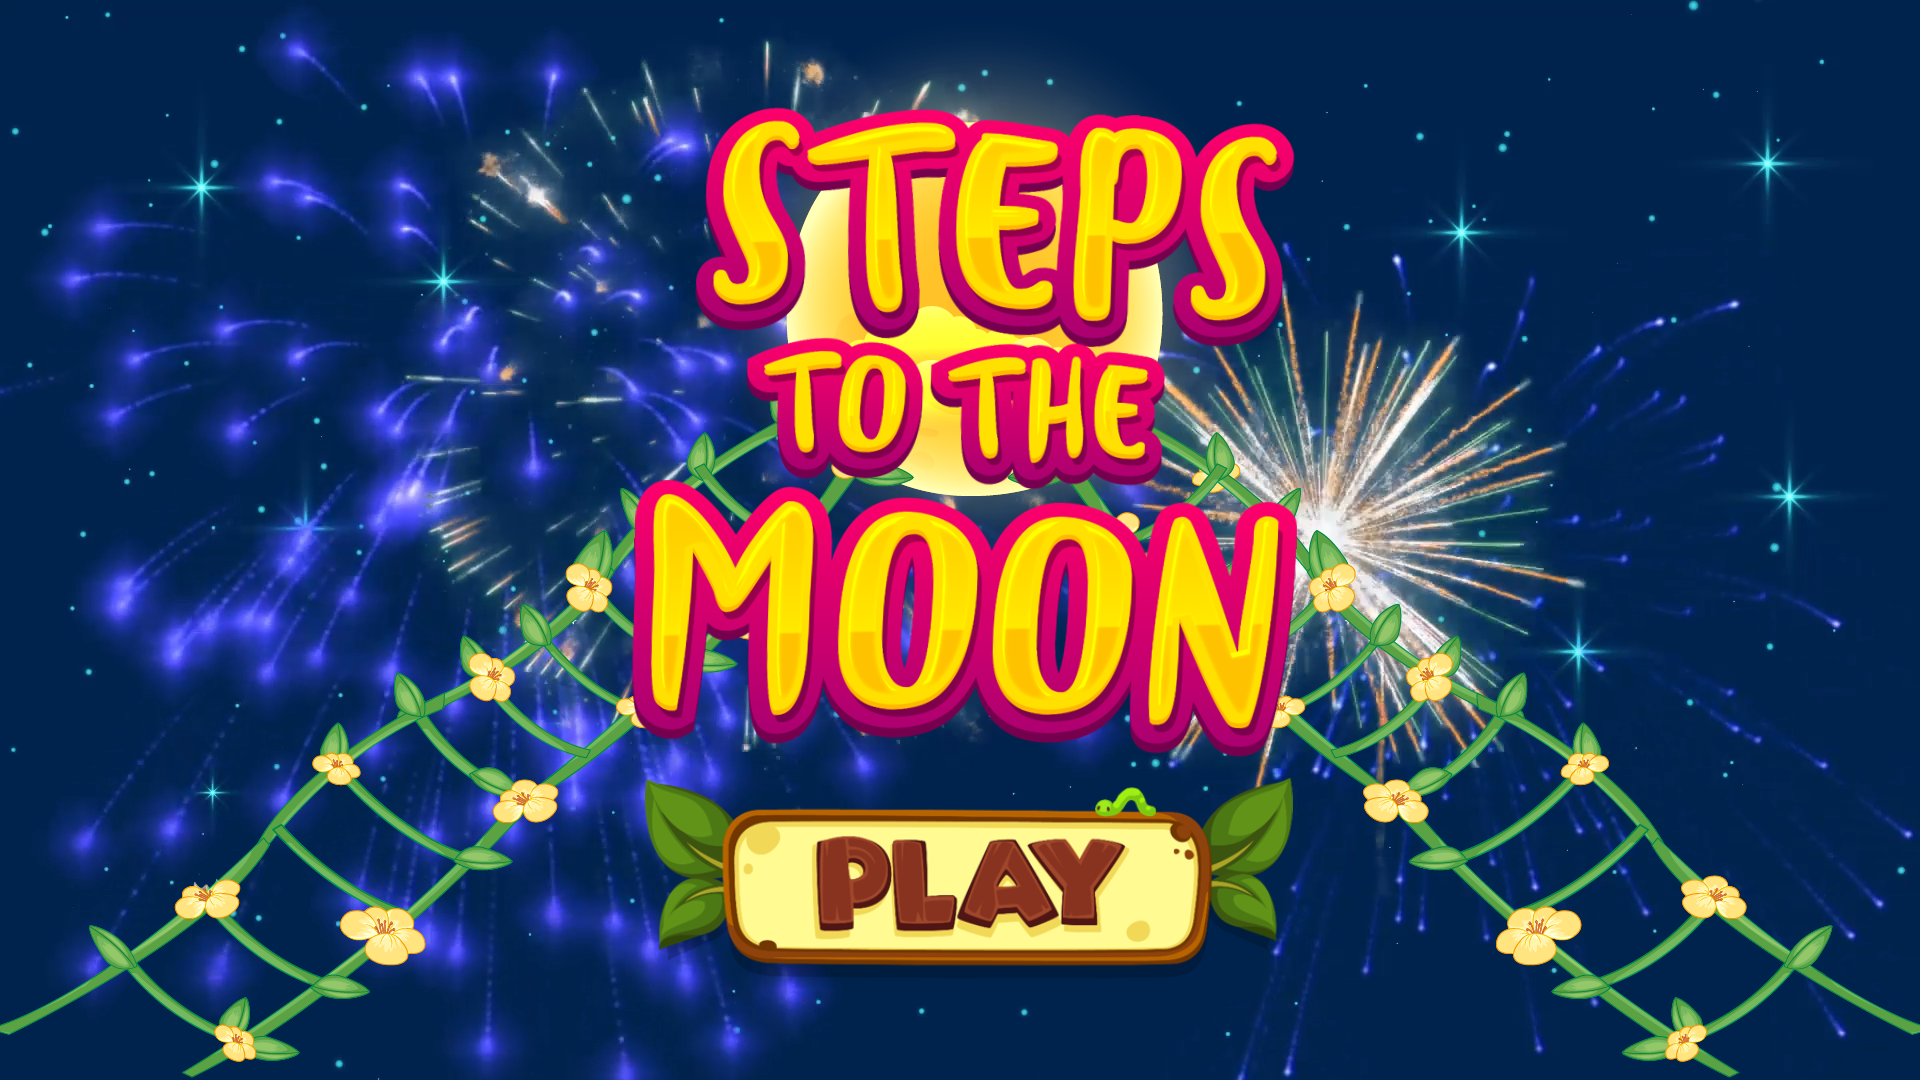 [Game trung thu] Steps to the moon